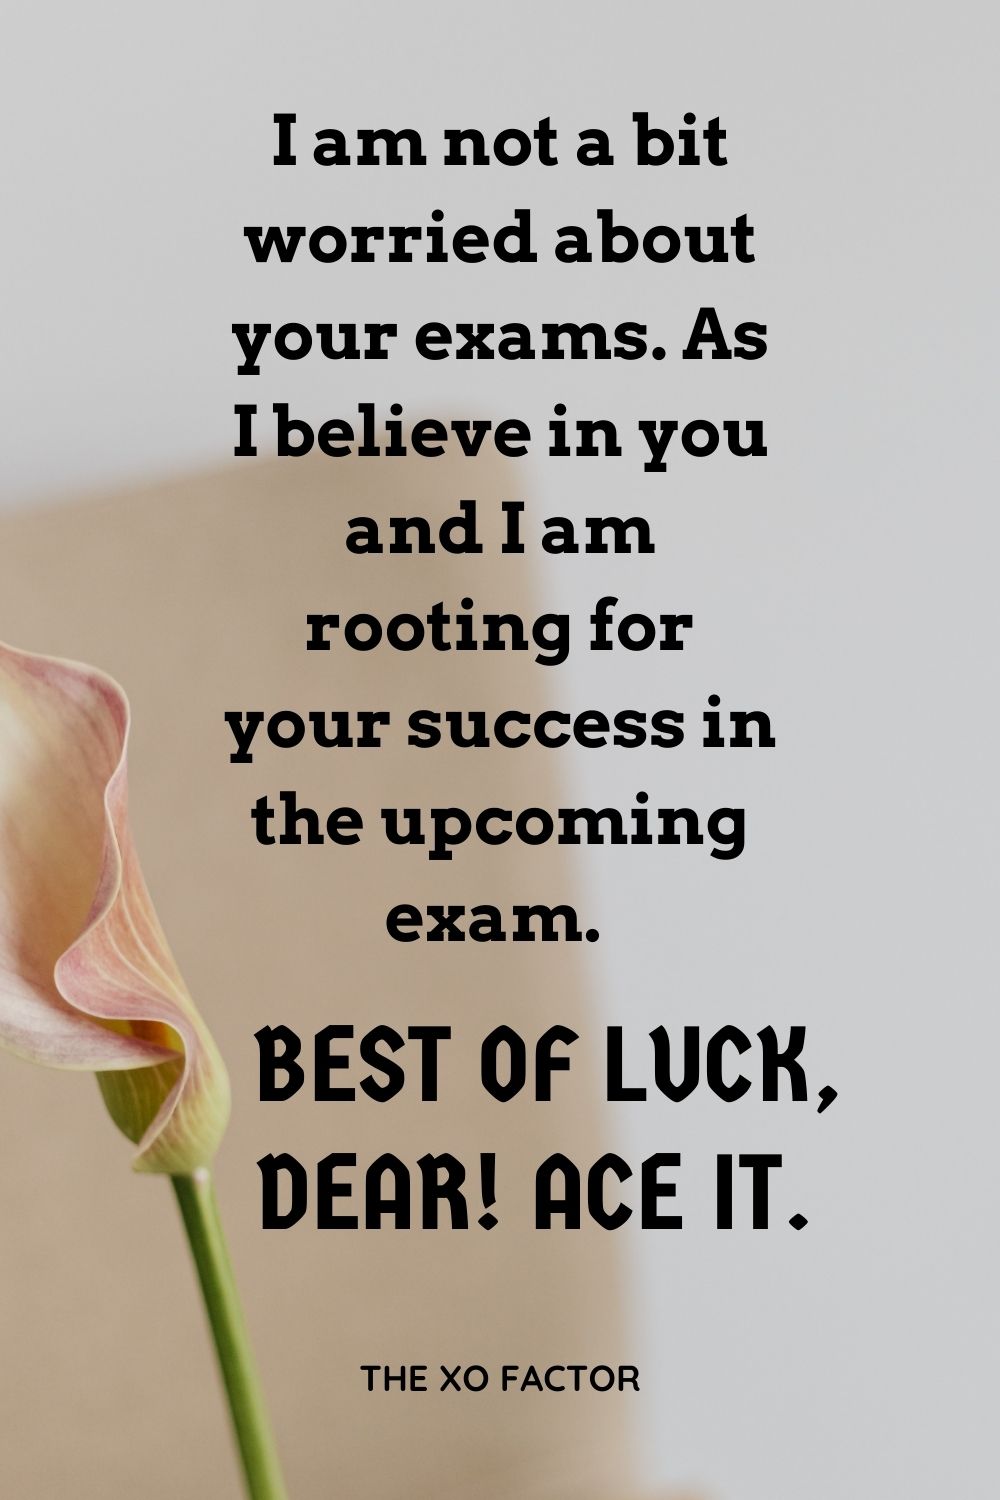 I am not a bit worried about your exams. As I believe in you and I am rooting for your success in the upcoming exam. Best of luck, dear! Ace it.